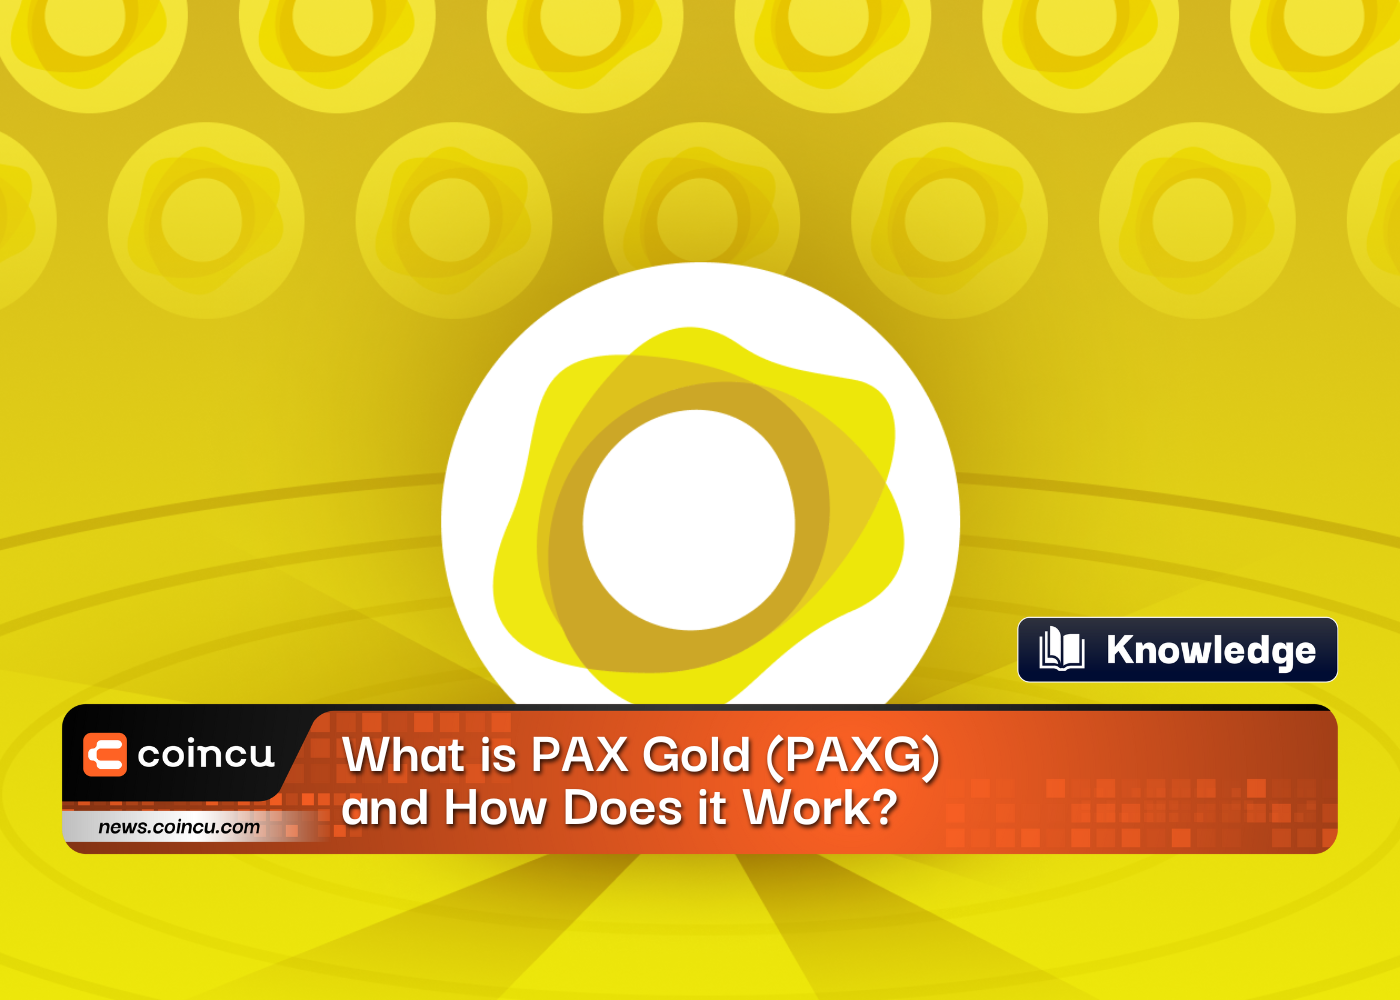 What is PAX Gold PAXG